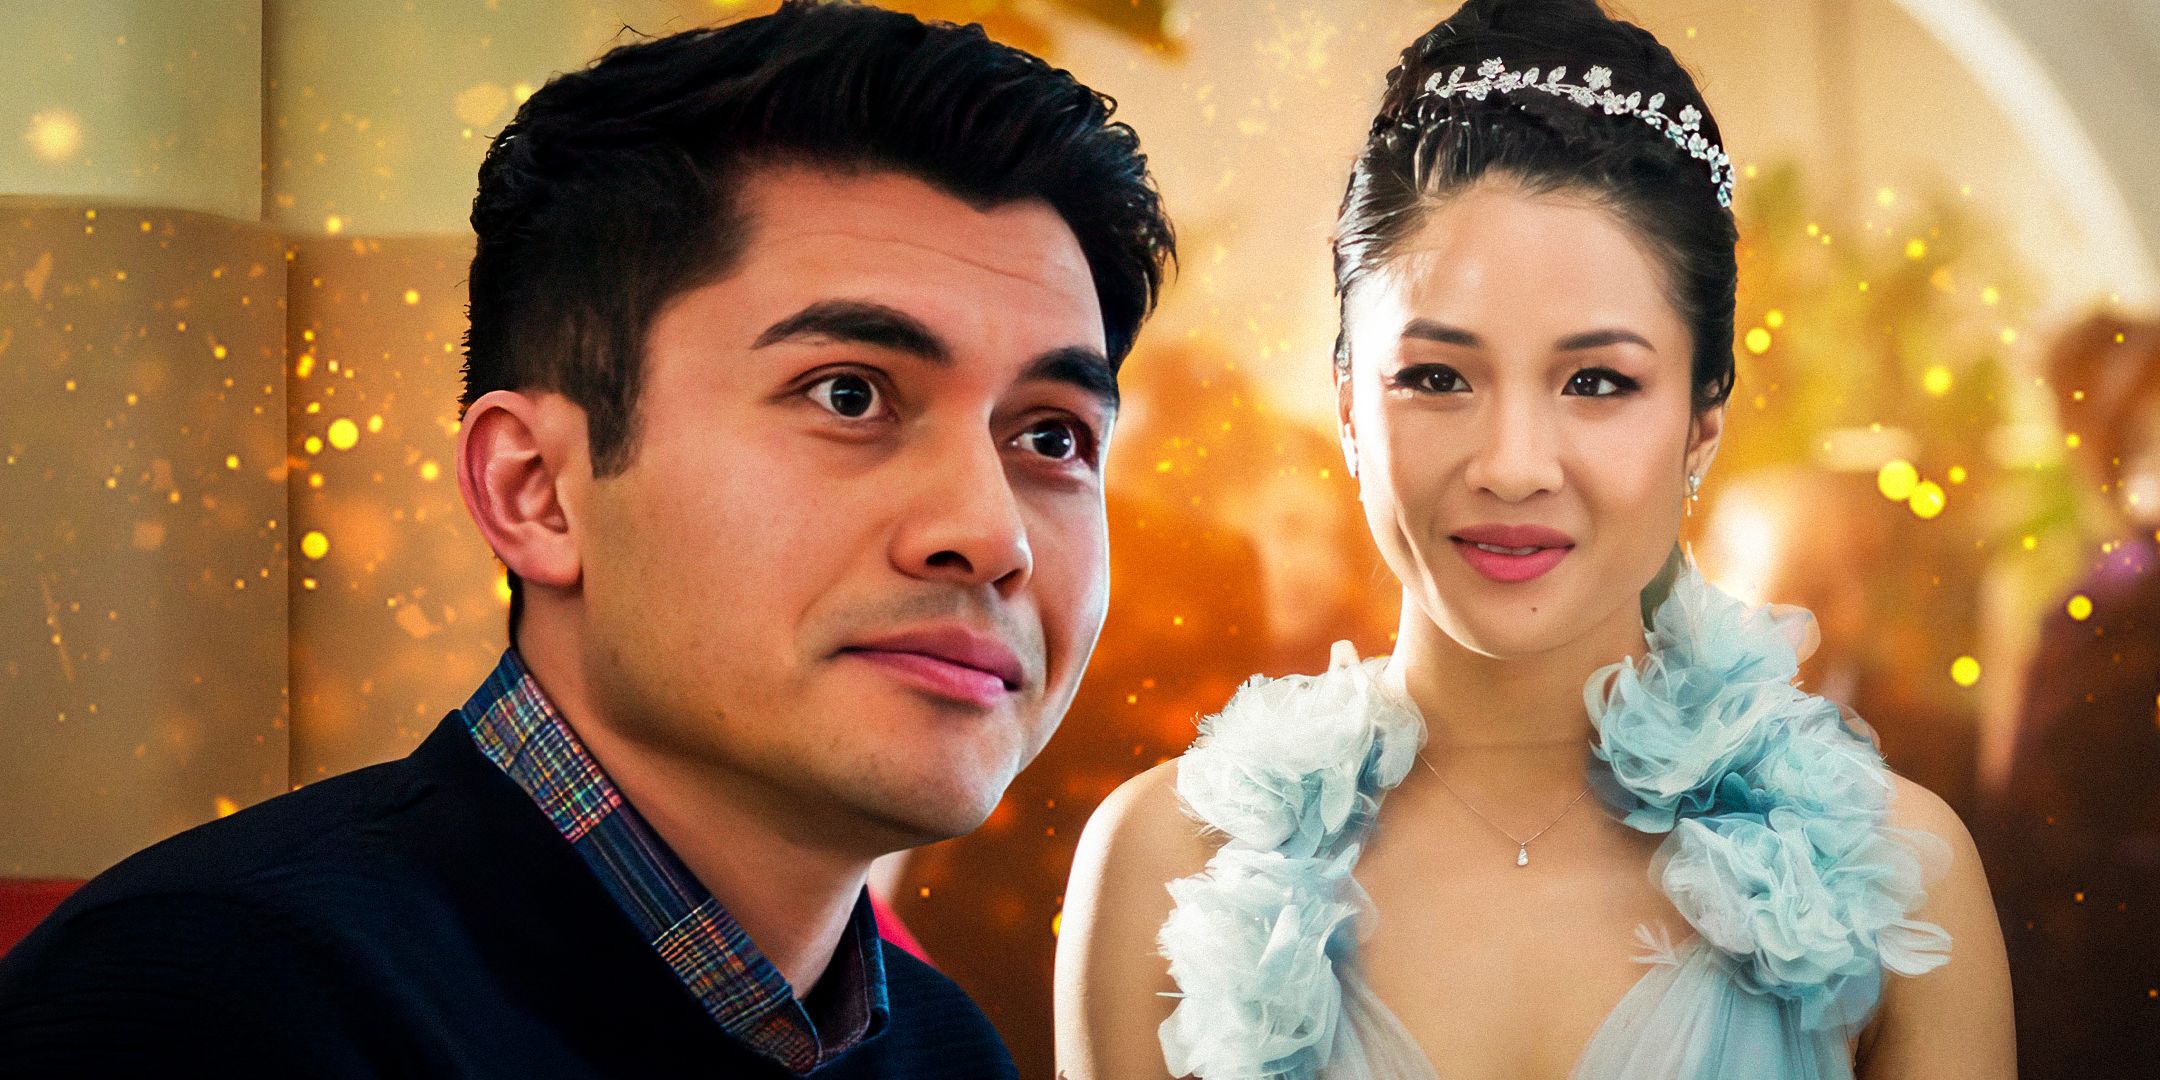 (Constance-Wu-as-Rachel-Chu)-and-(Henry-Golding-as-Nick-Young)-from-Crazy-Rich-Asians-